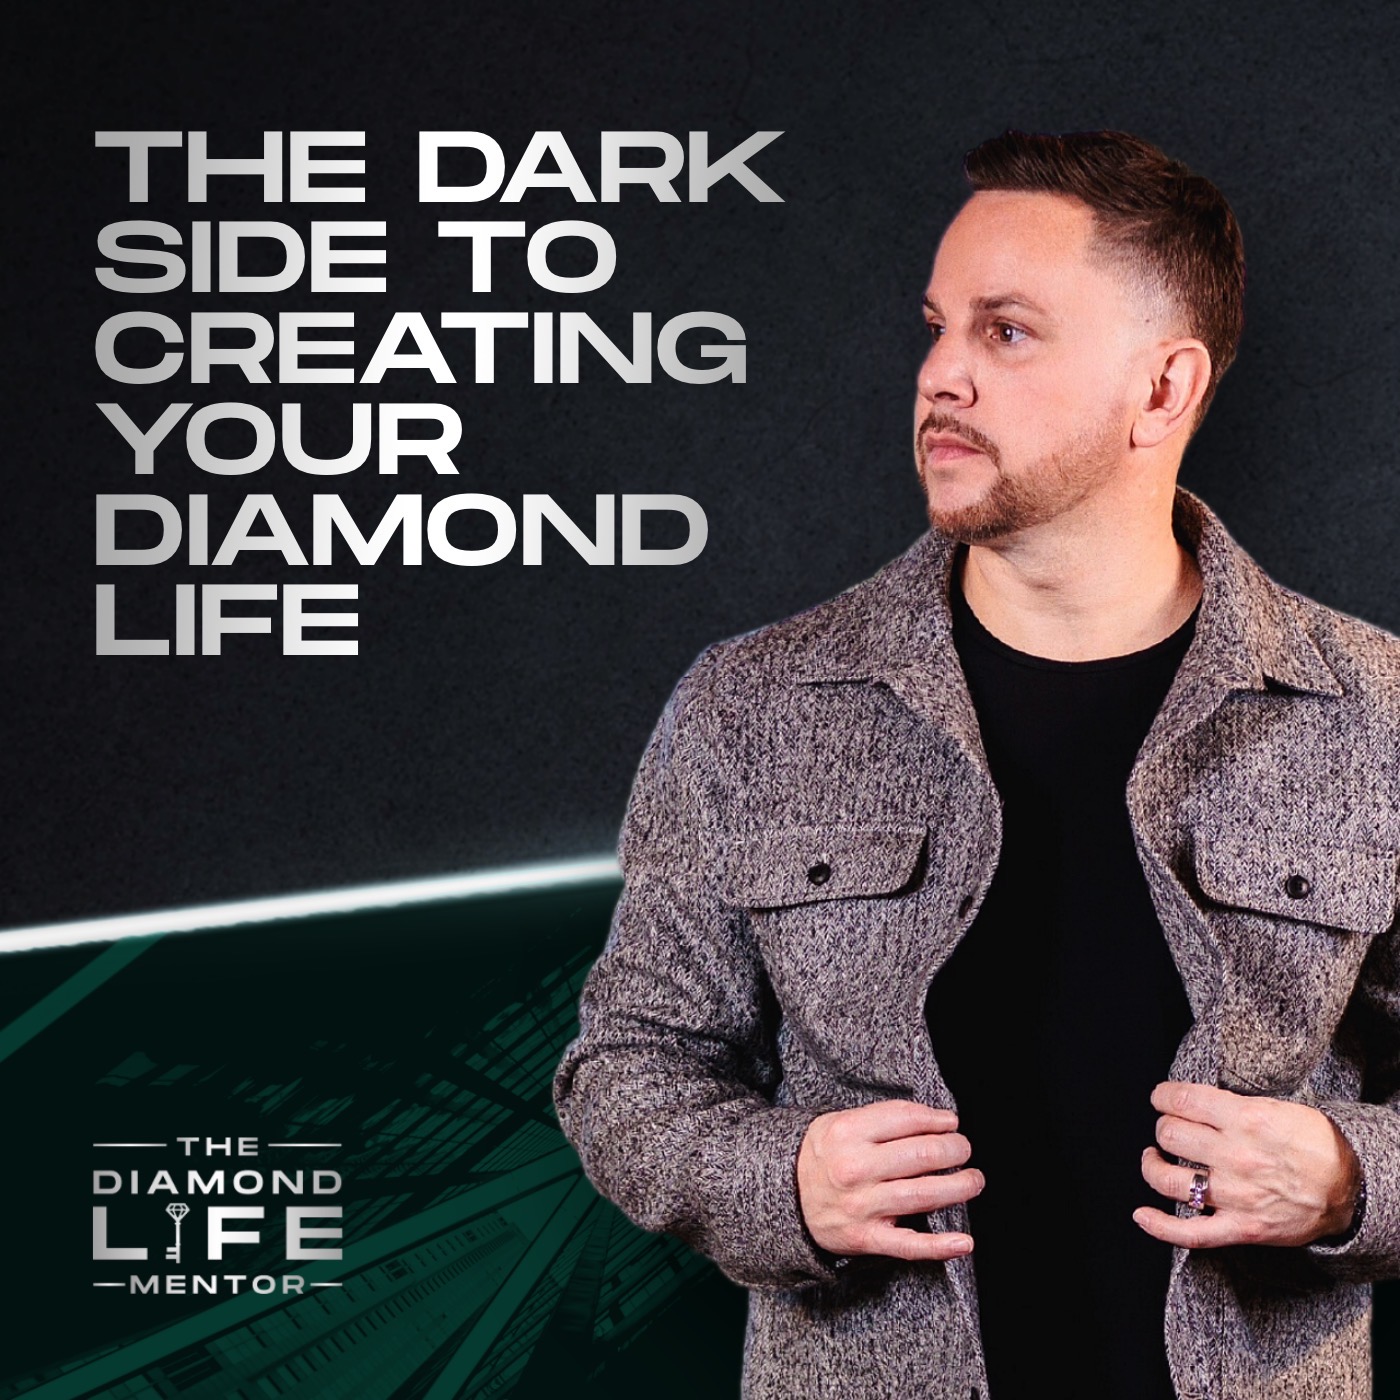 The Dark Side To Creating Your Diamond Life